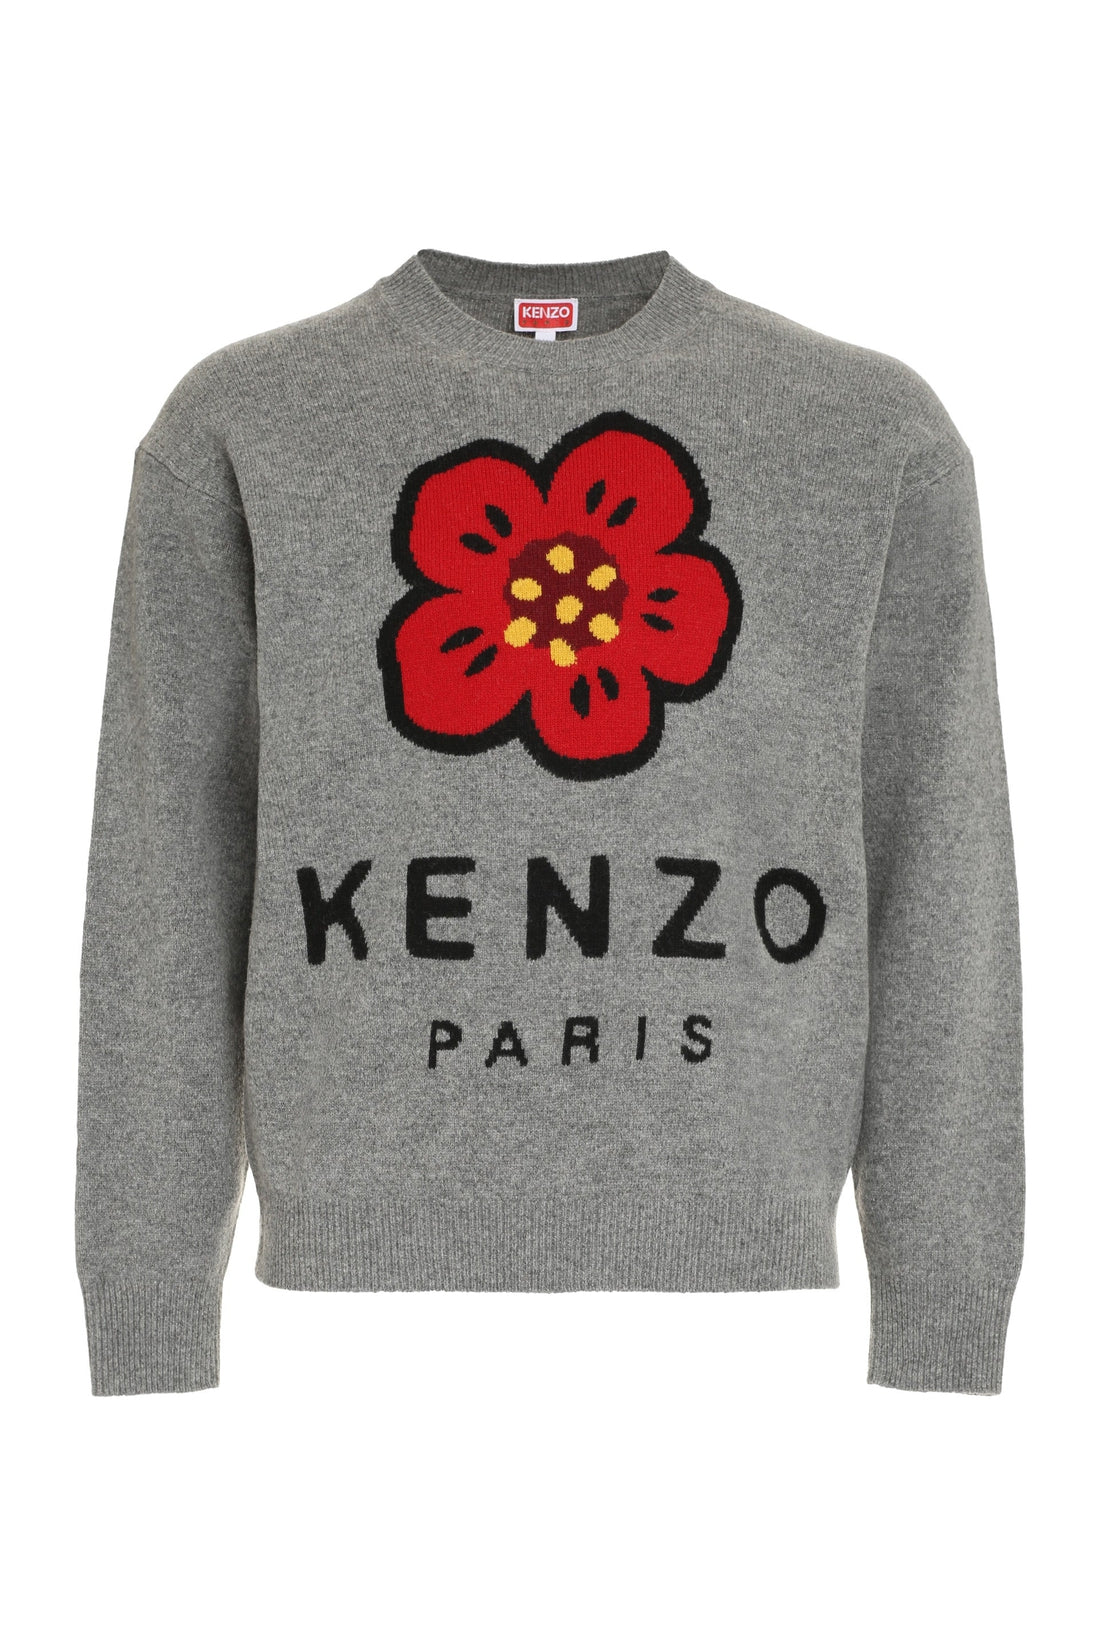 Kenzo-OUTLET-SALE-Intarsia wool sweater-ARCHIVIST